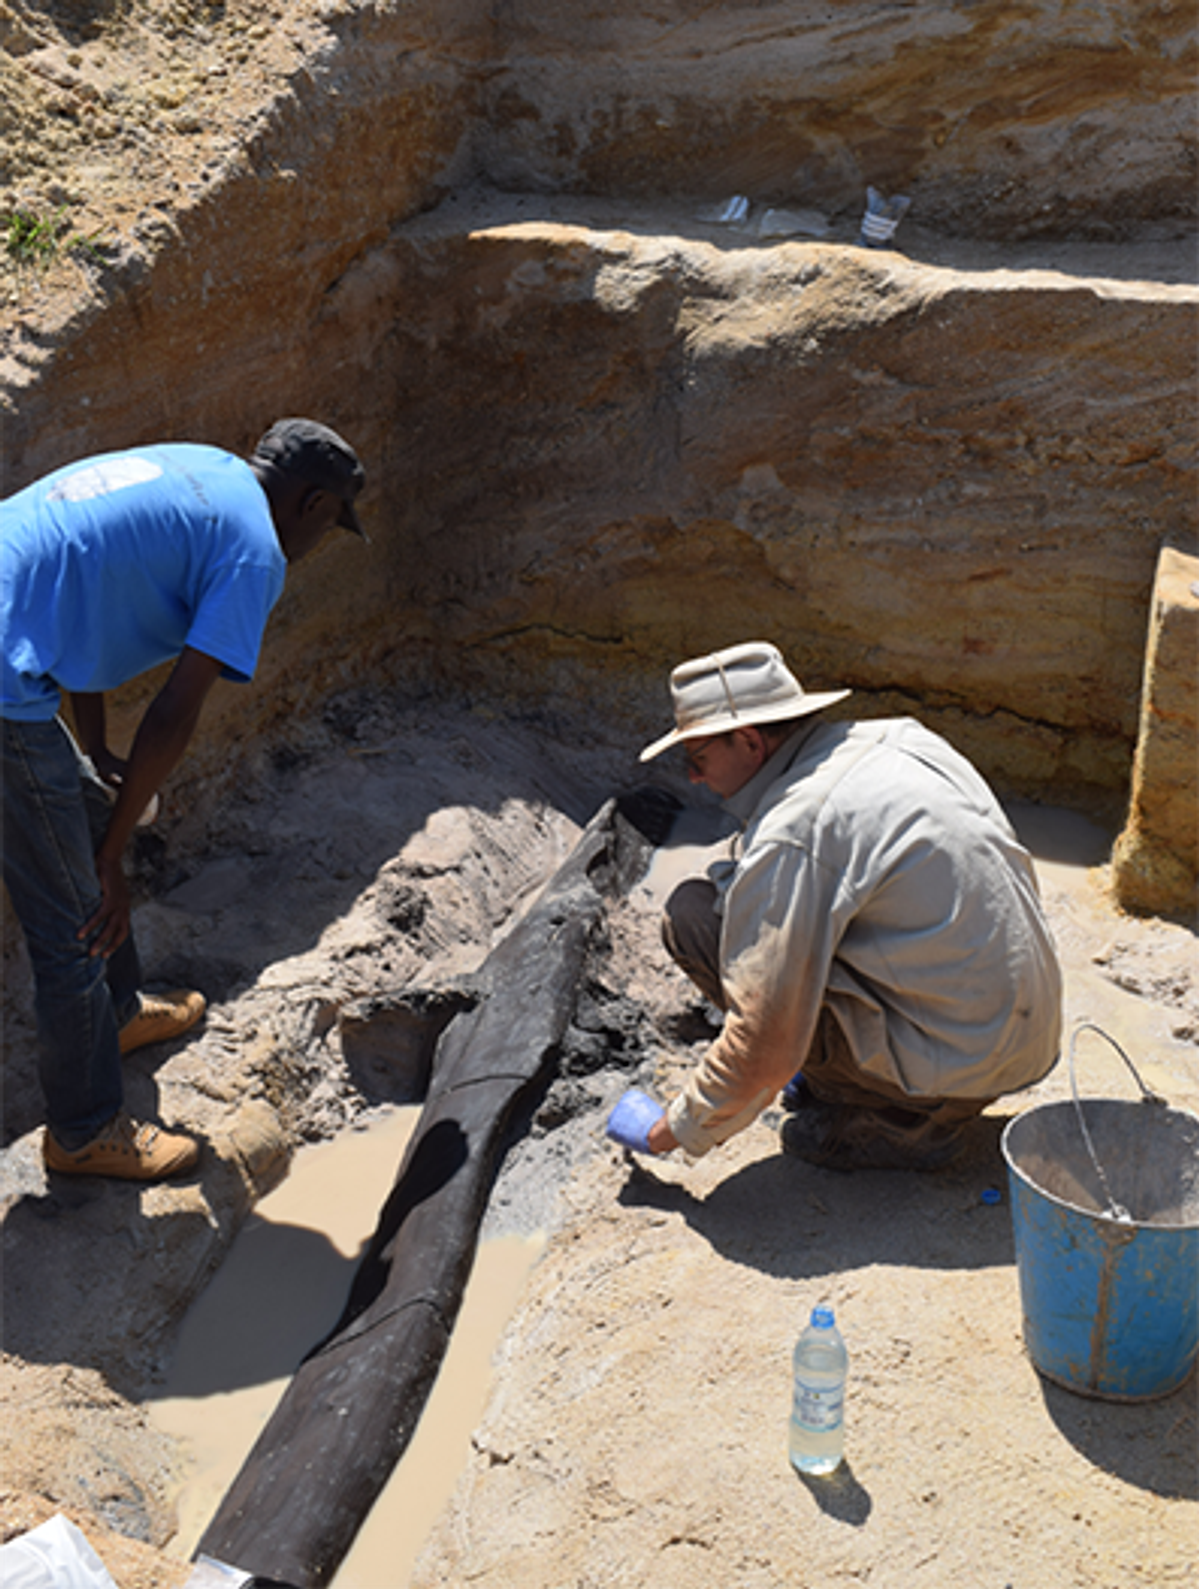 World's oldest wooden structure discovered in Zambia